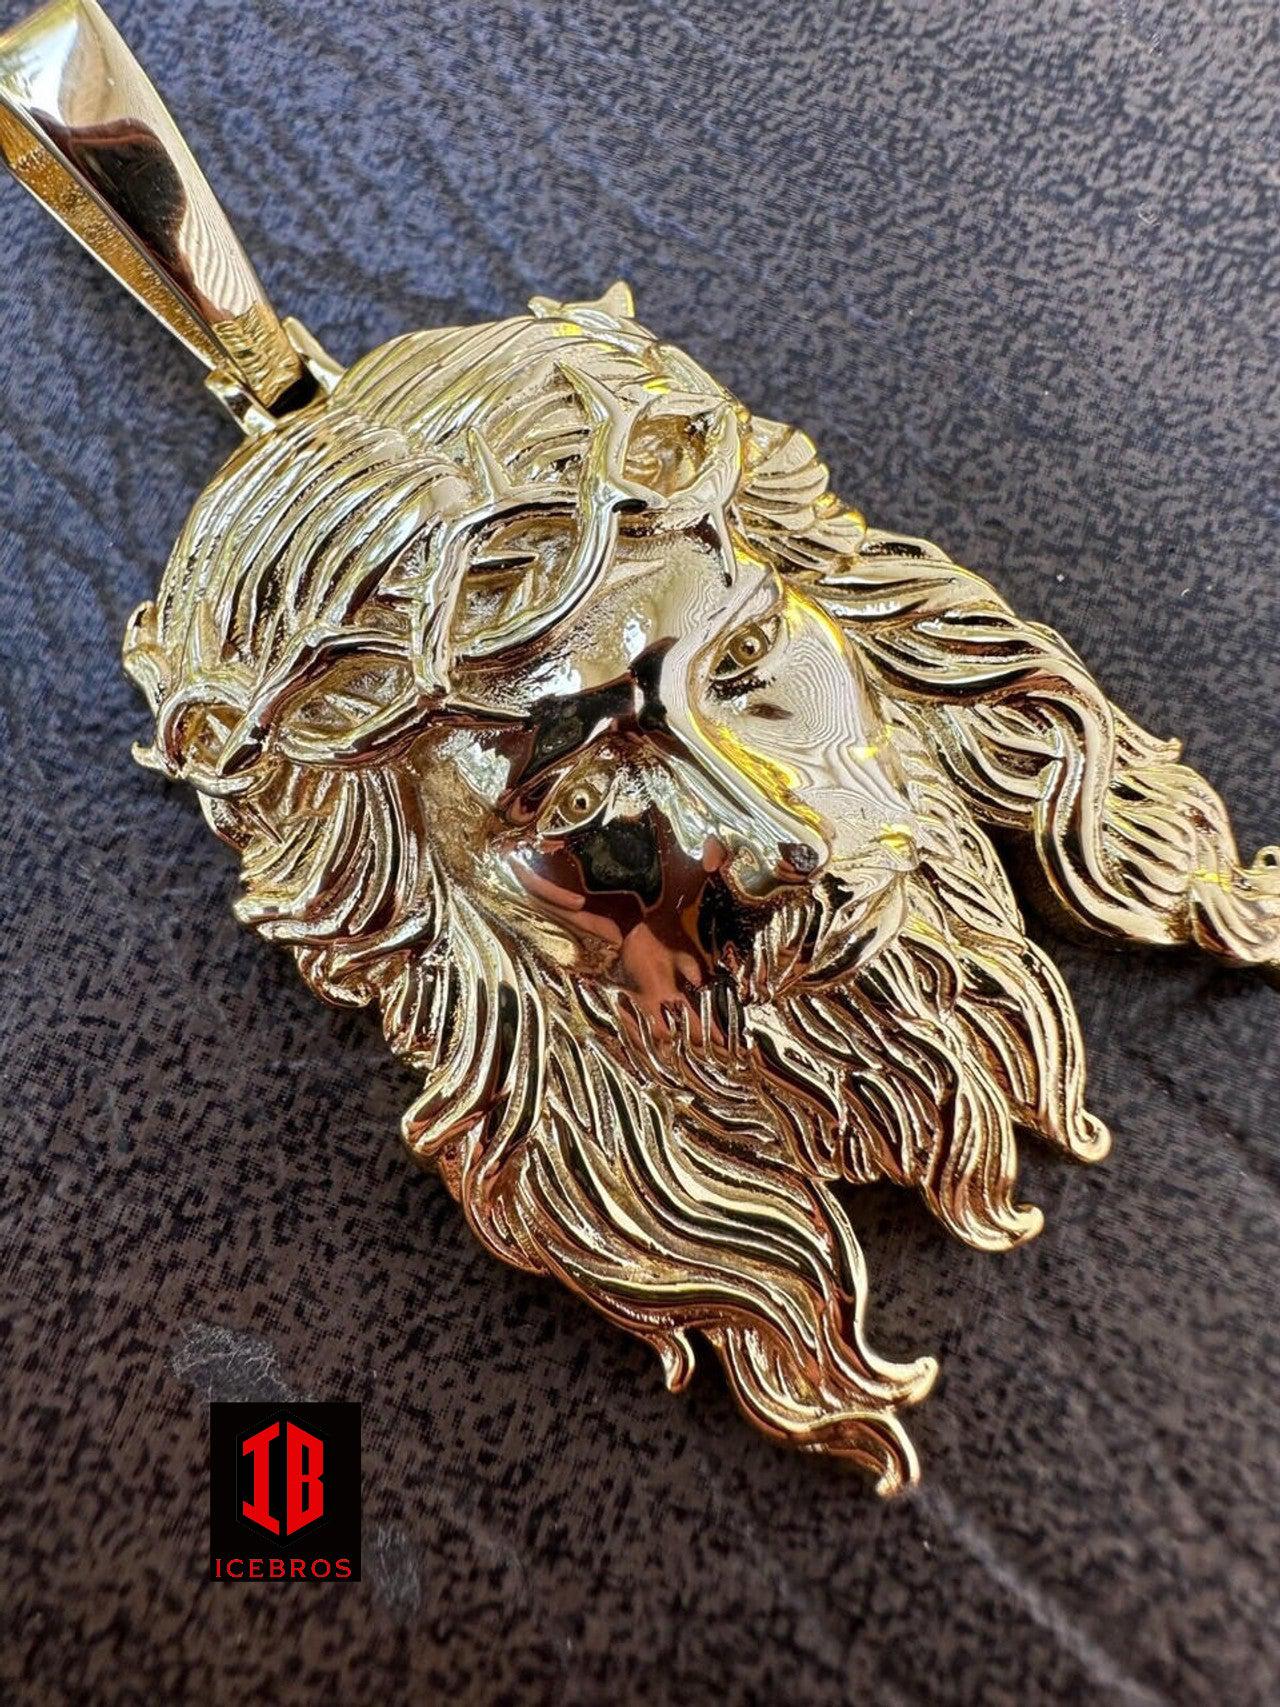 Glossy VERY HEAVY Fine  925 ITALY Silver Jesus Piece Iced Pendant Chain - 3 Sizes